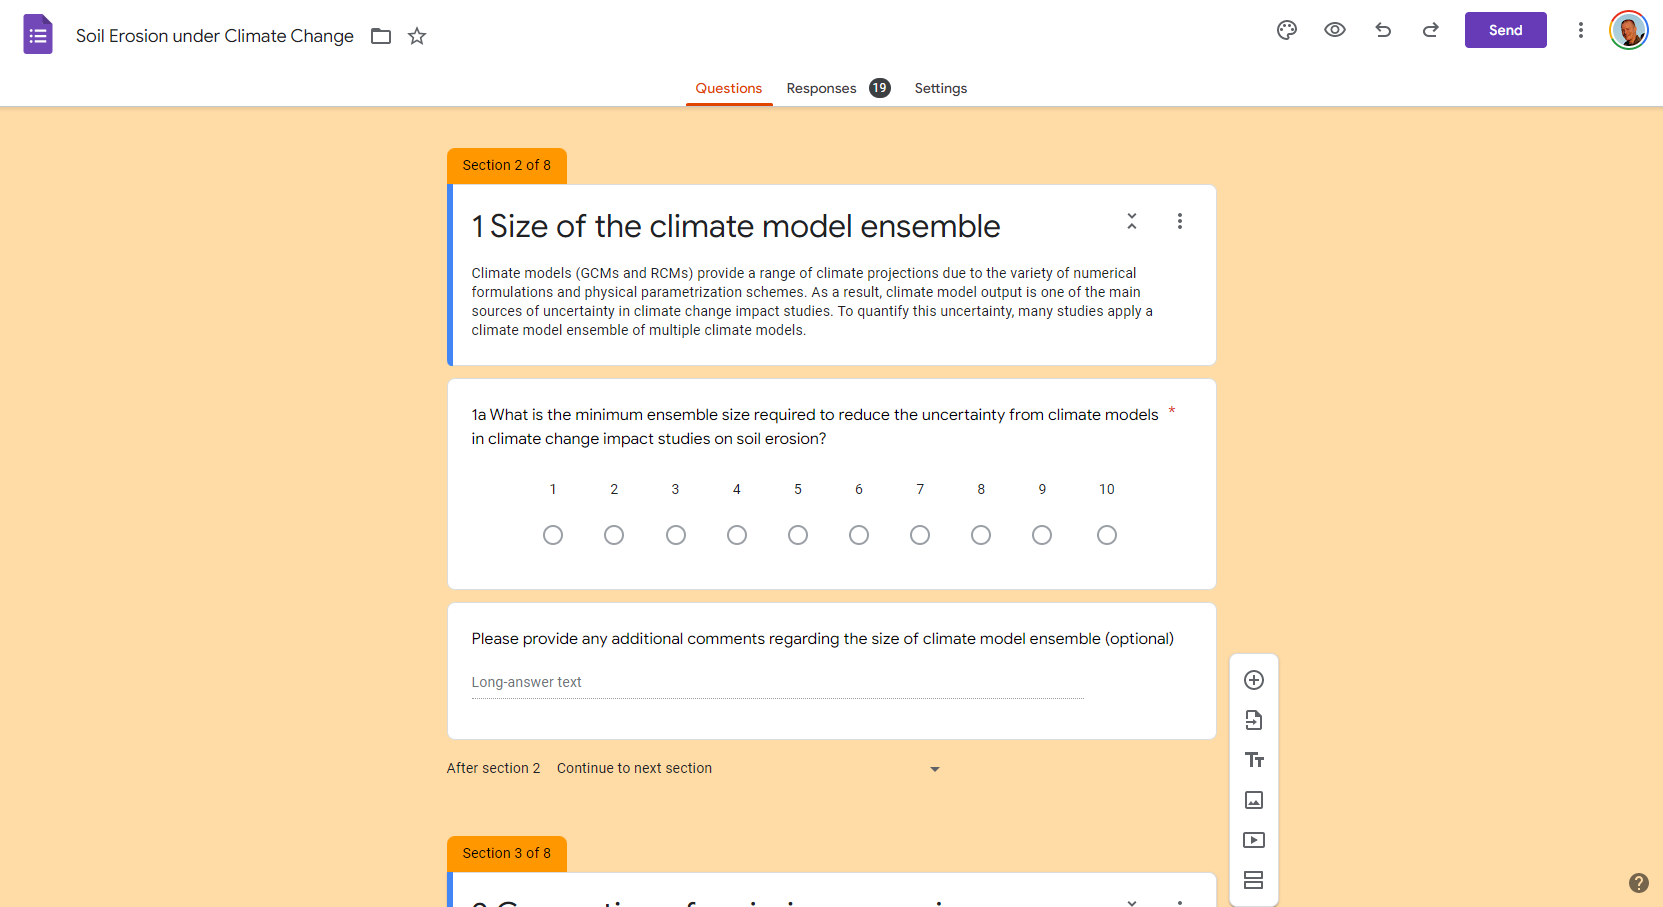 Question 1 of the online questionnaire on the impact of climate change on soil erosion.